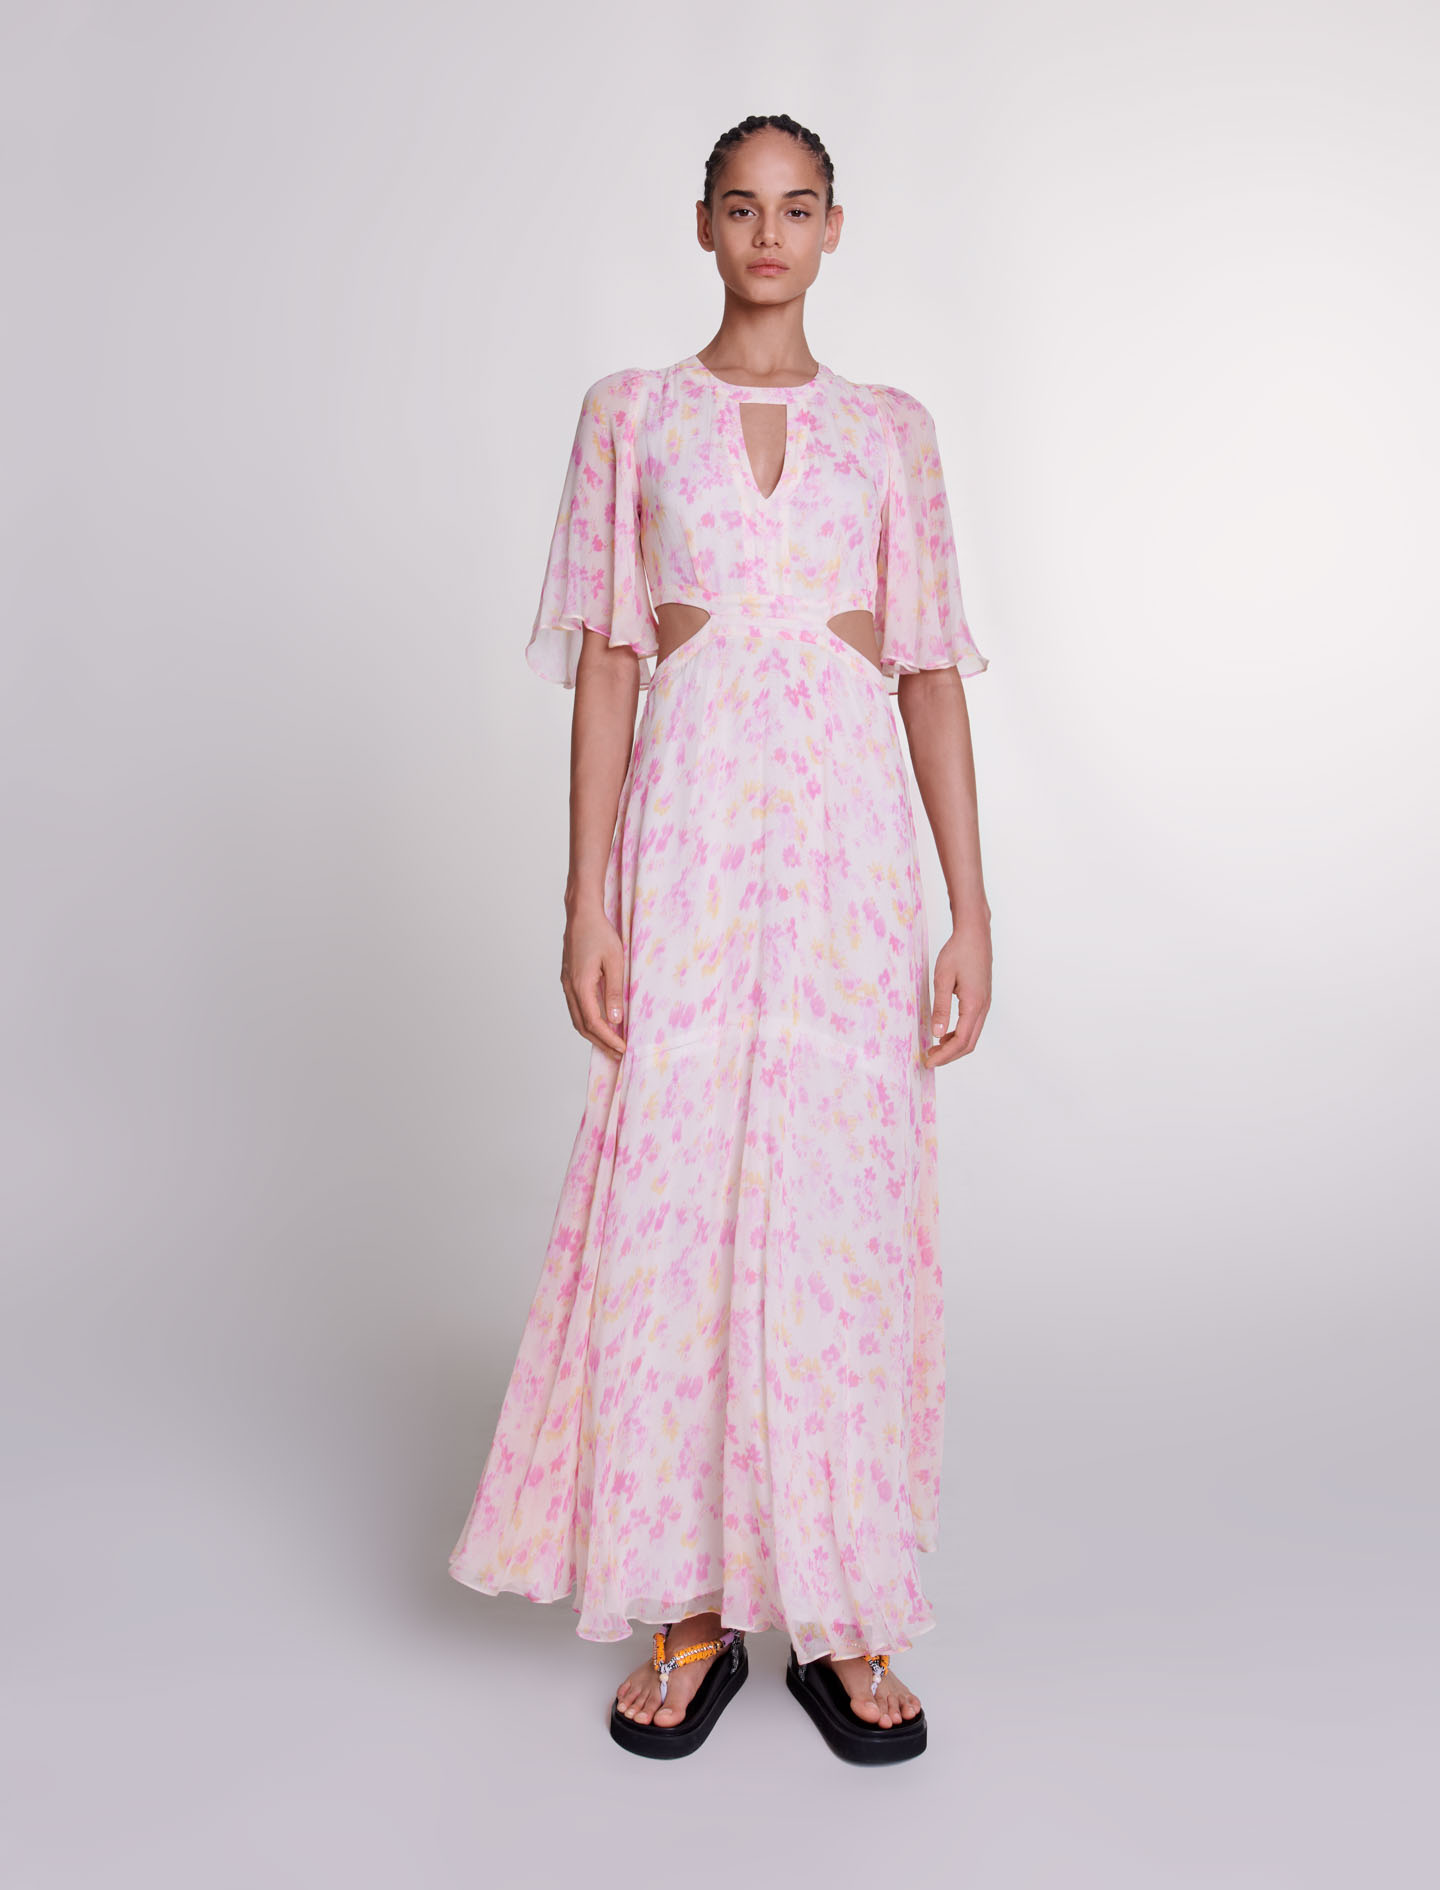 Maje Woman's viscose Lining: Floral print maxi dress for Spring/Summer, in color Print Sunny flower pink /